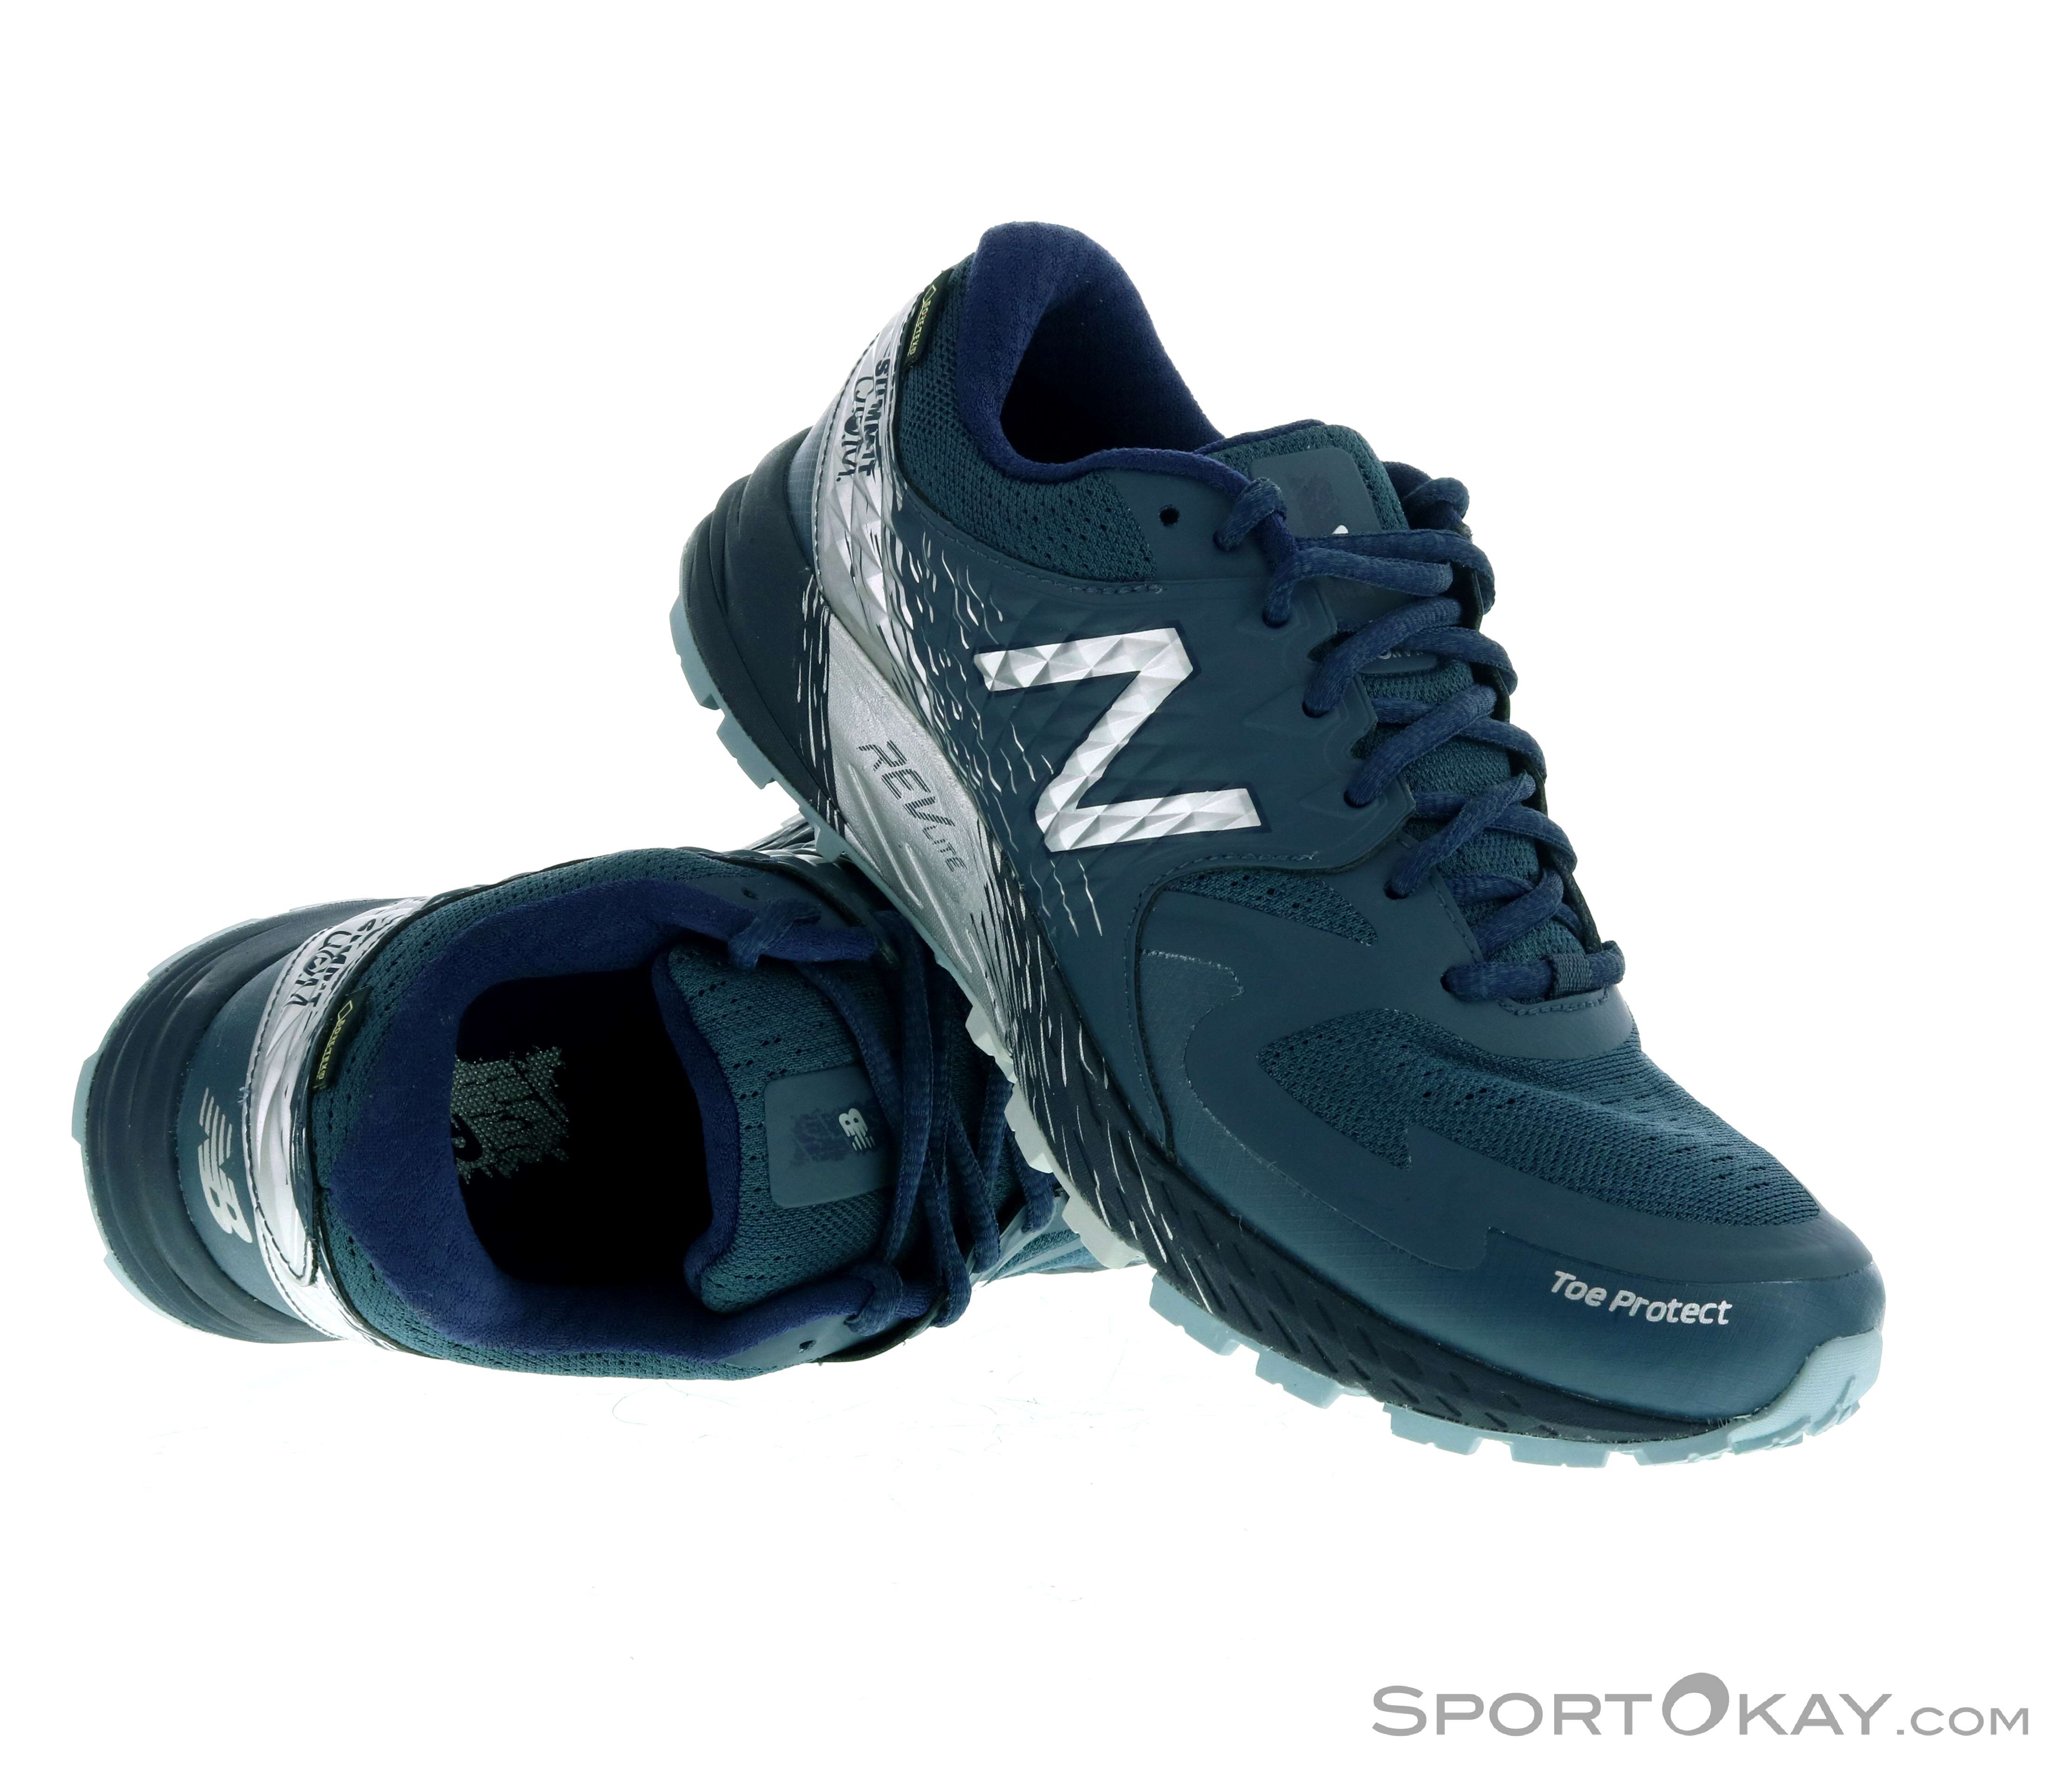 New Balance 910v4 Trail Gtx Outlet Store, UP TO 68% OFF